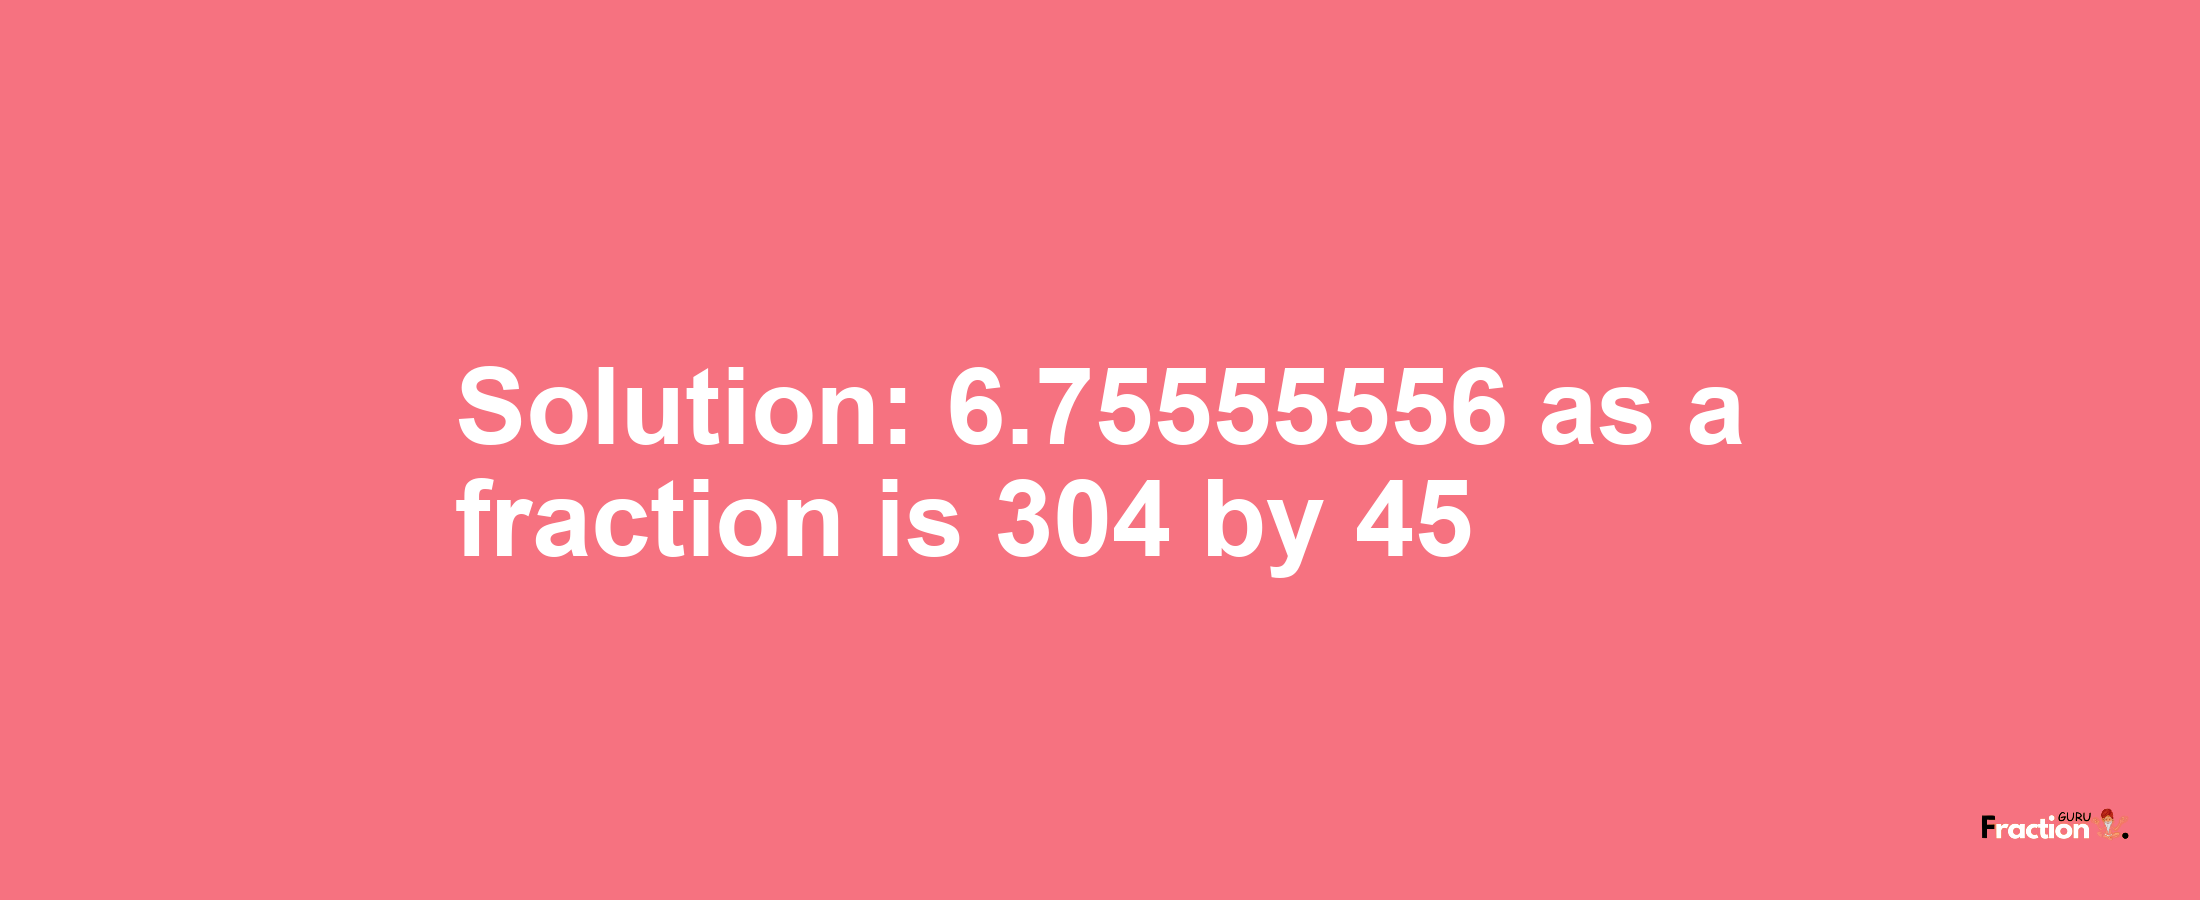 Solution:6.75555556 as a fraction is 304/45